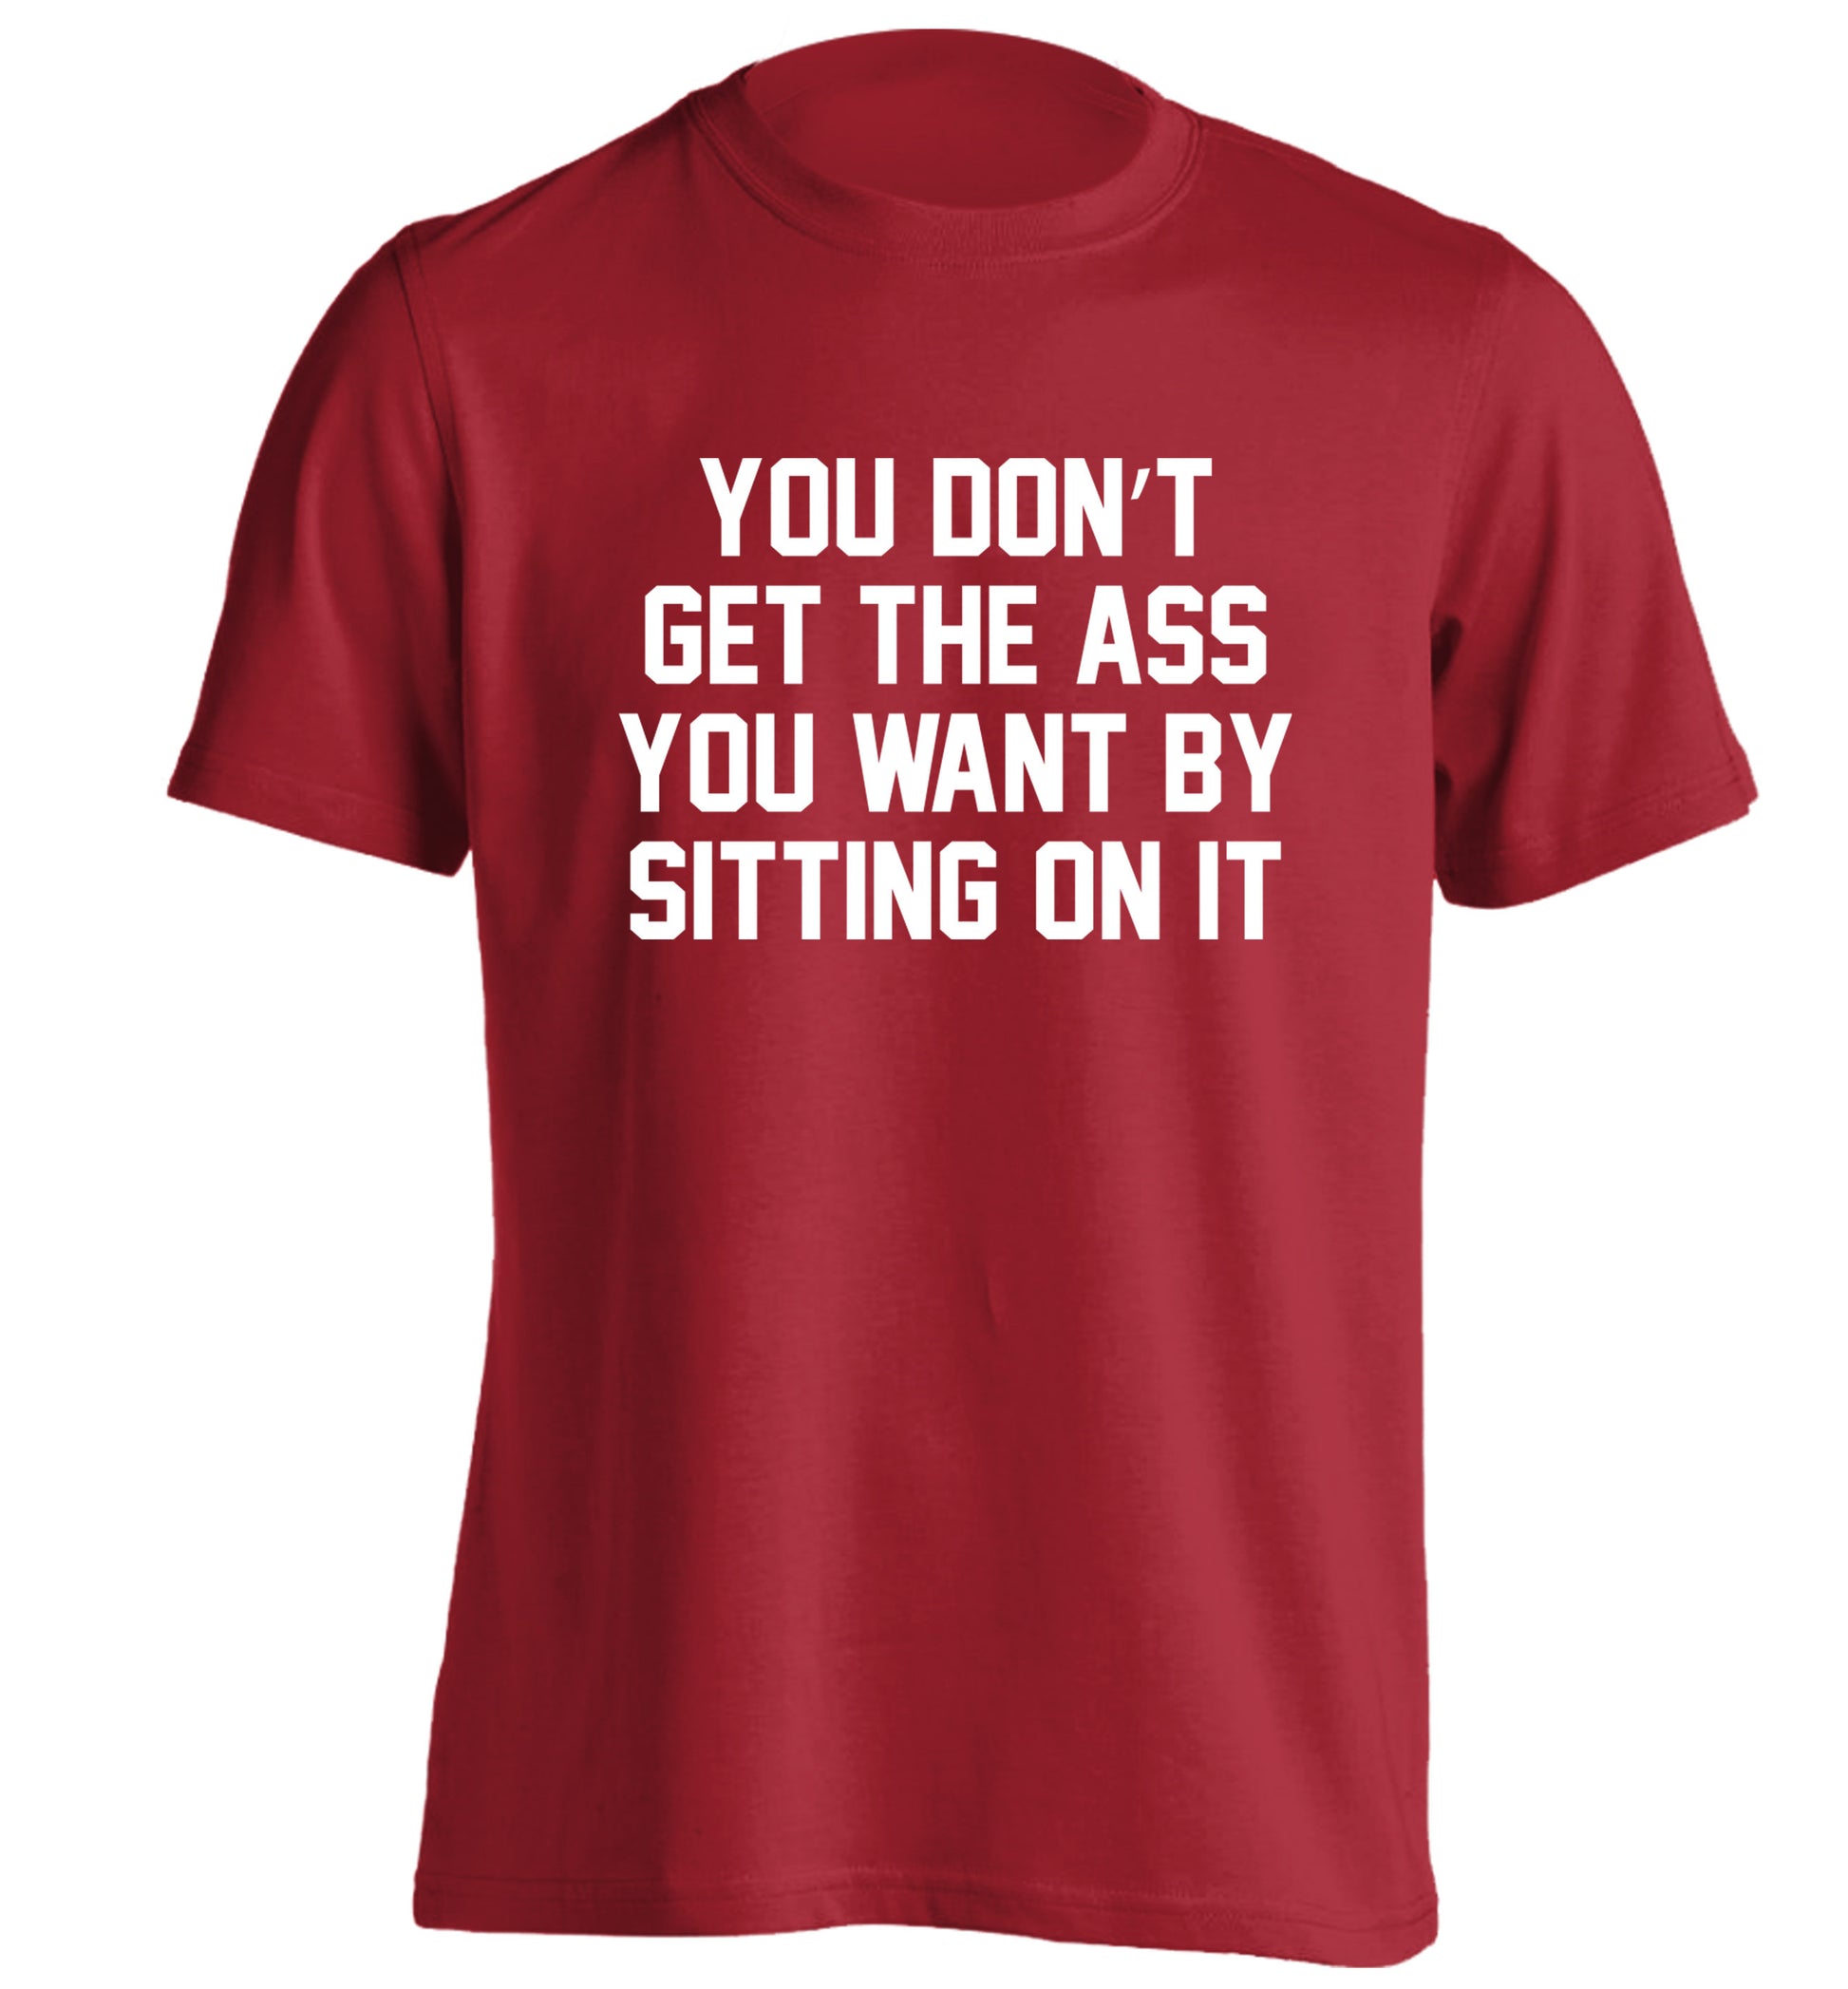 You don't get the ass you want by sitting on it adults unisex red Tshirt 2XL